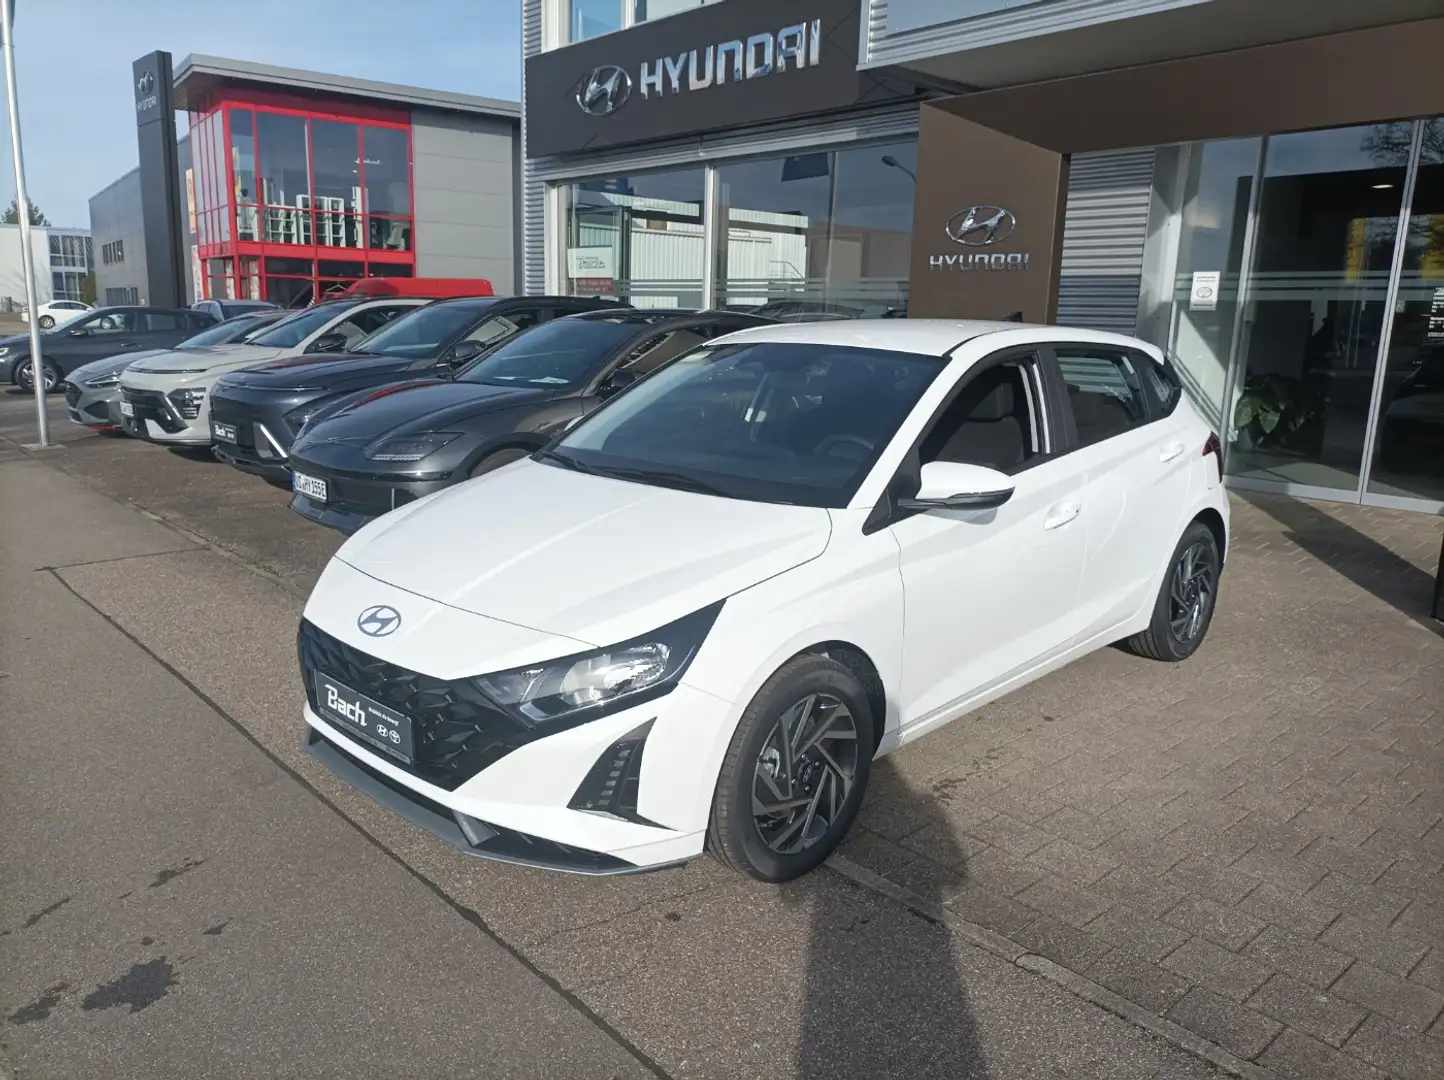 Hyundai i20 FL 1.0 T-Gdi 100PS M/T Ambientebeleuchtung Wit - 1